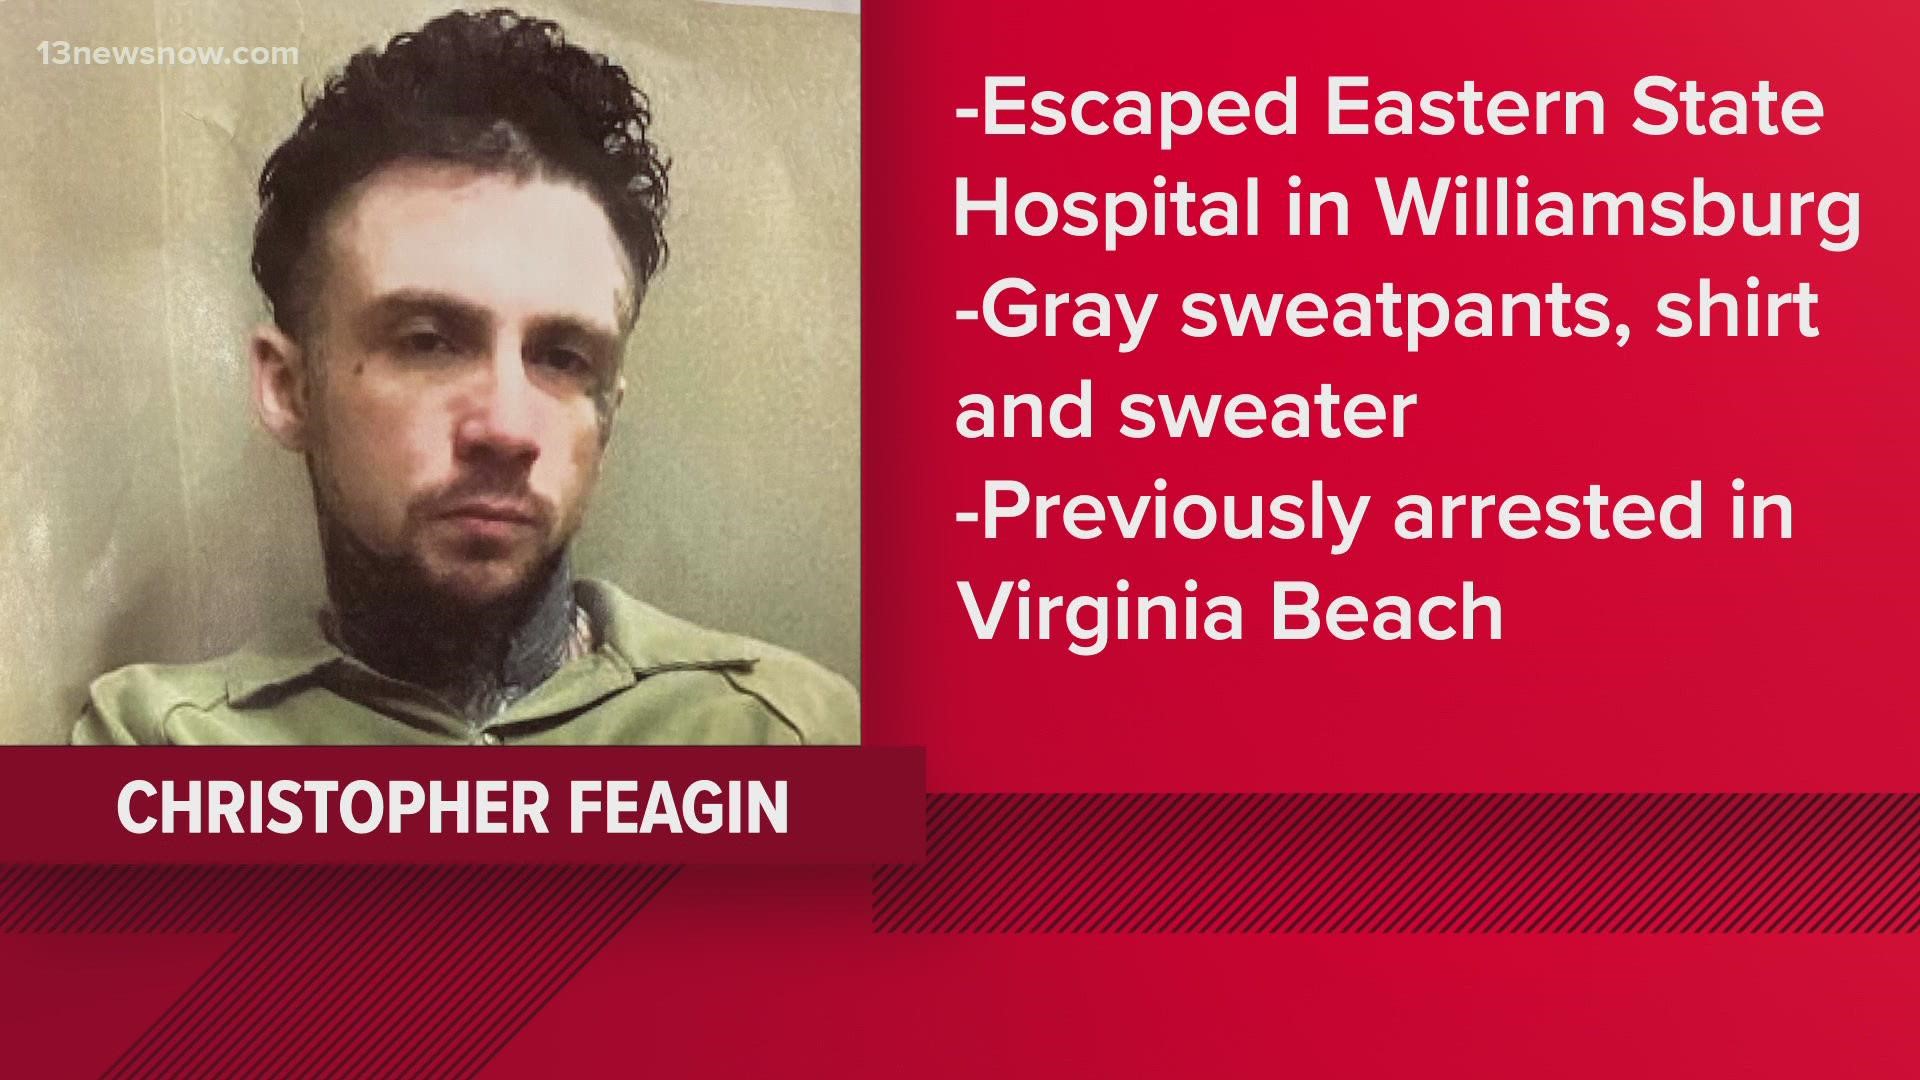 32-year-old Christopher Feagin is missing. He allegedly escaped Eastern State Hospital off Ironbound Road around 1:40 a.m. Monday.